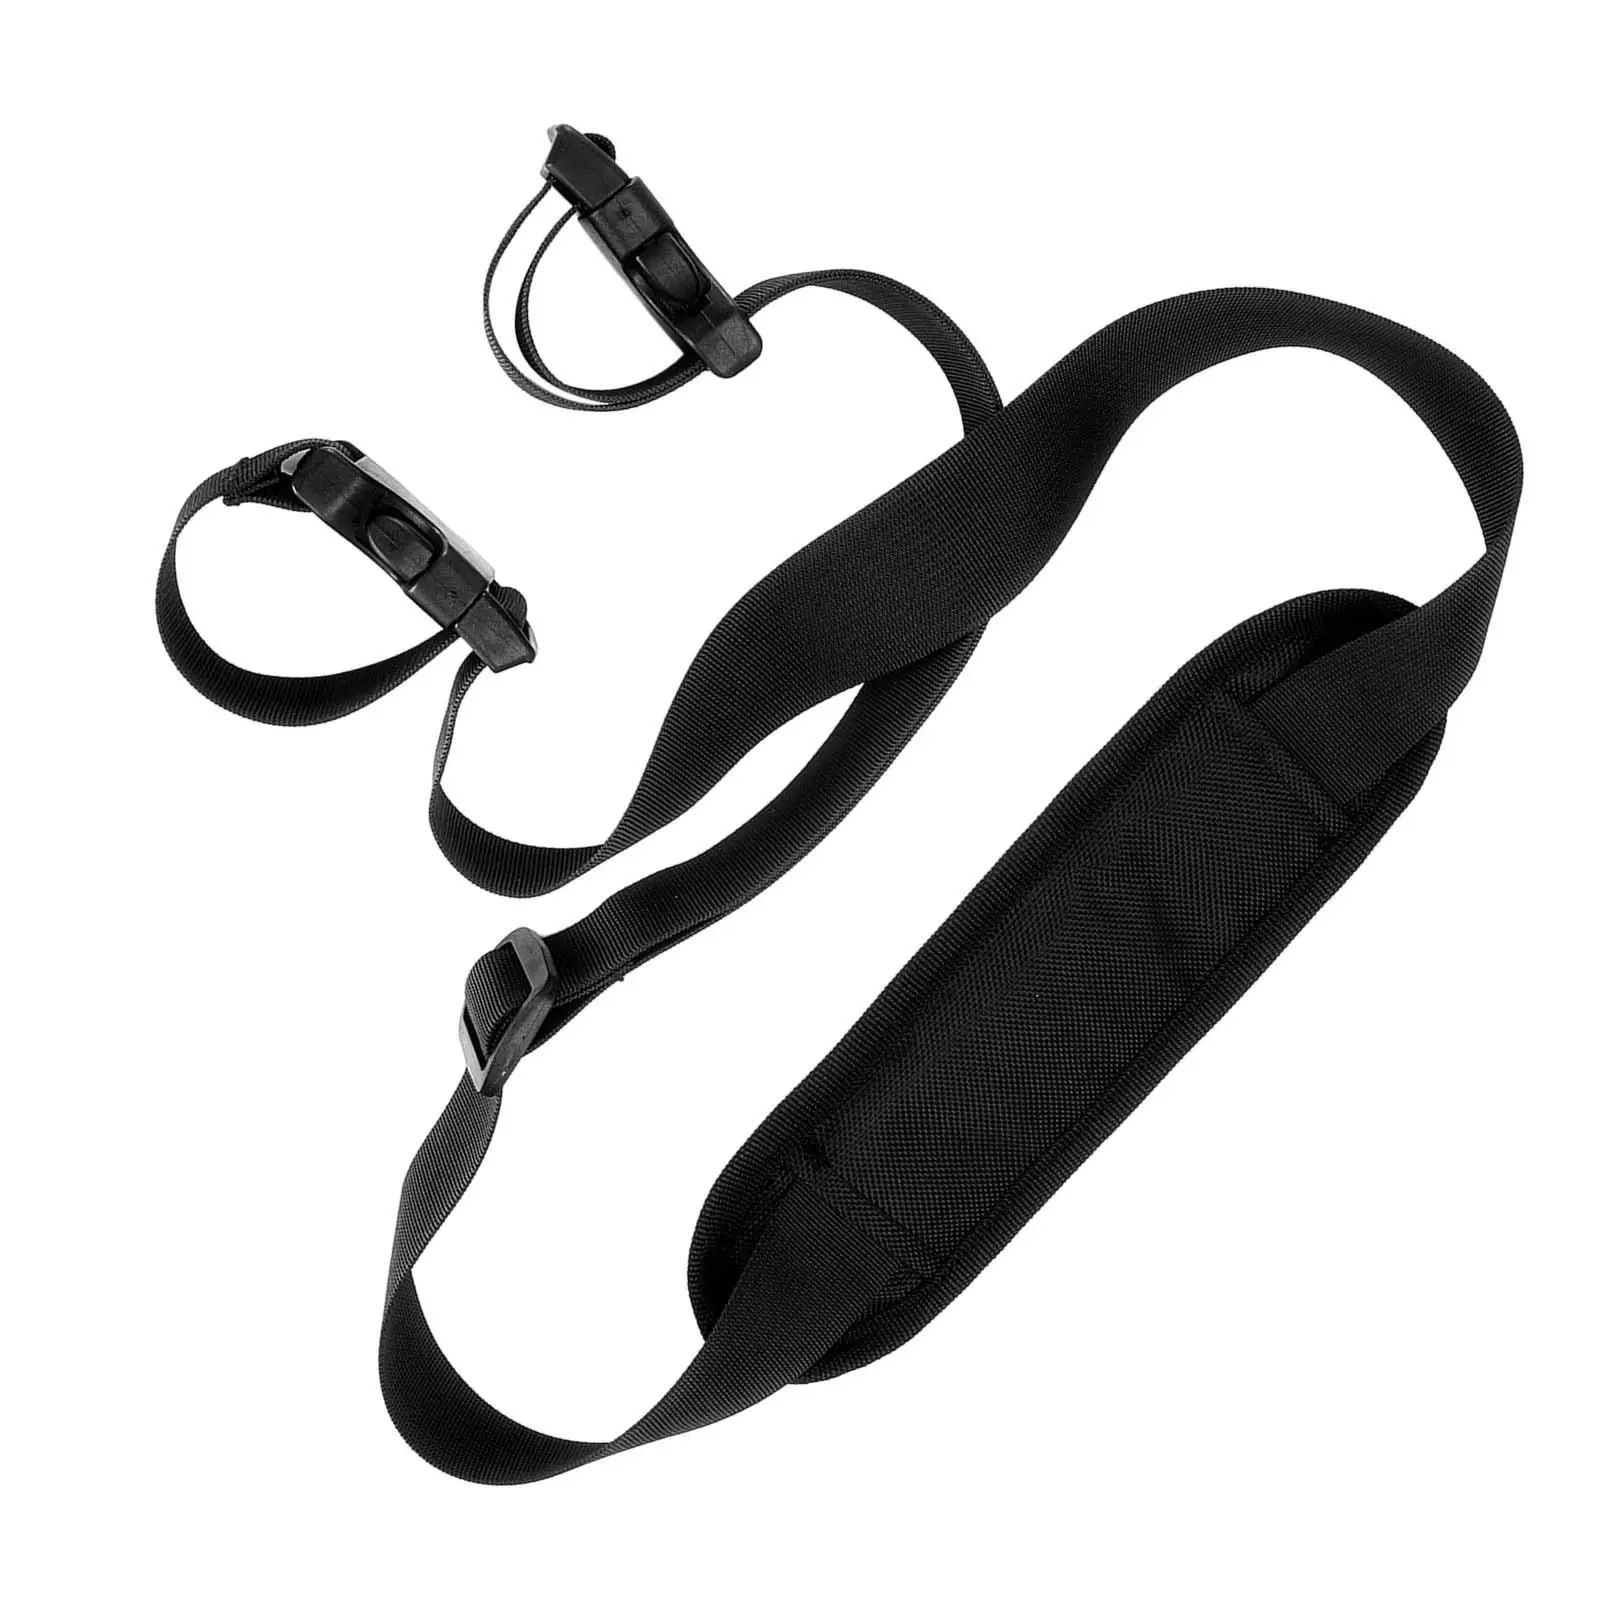 Scooter Shoulder Strap Lightweight Carrier Heavy Duty Universal Carrying Belt for Ski Scooter Replacement Strap Balance Bike